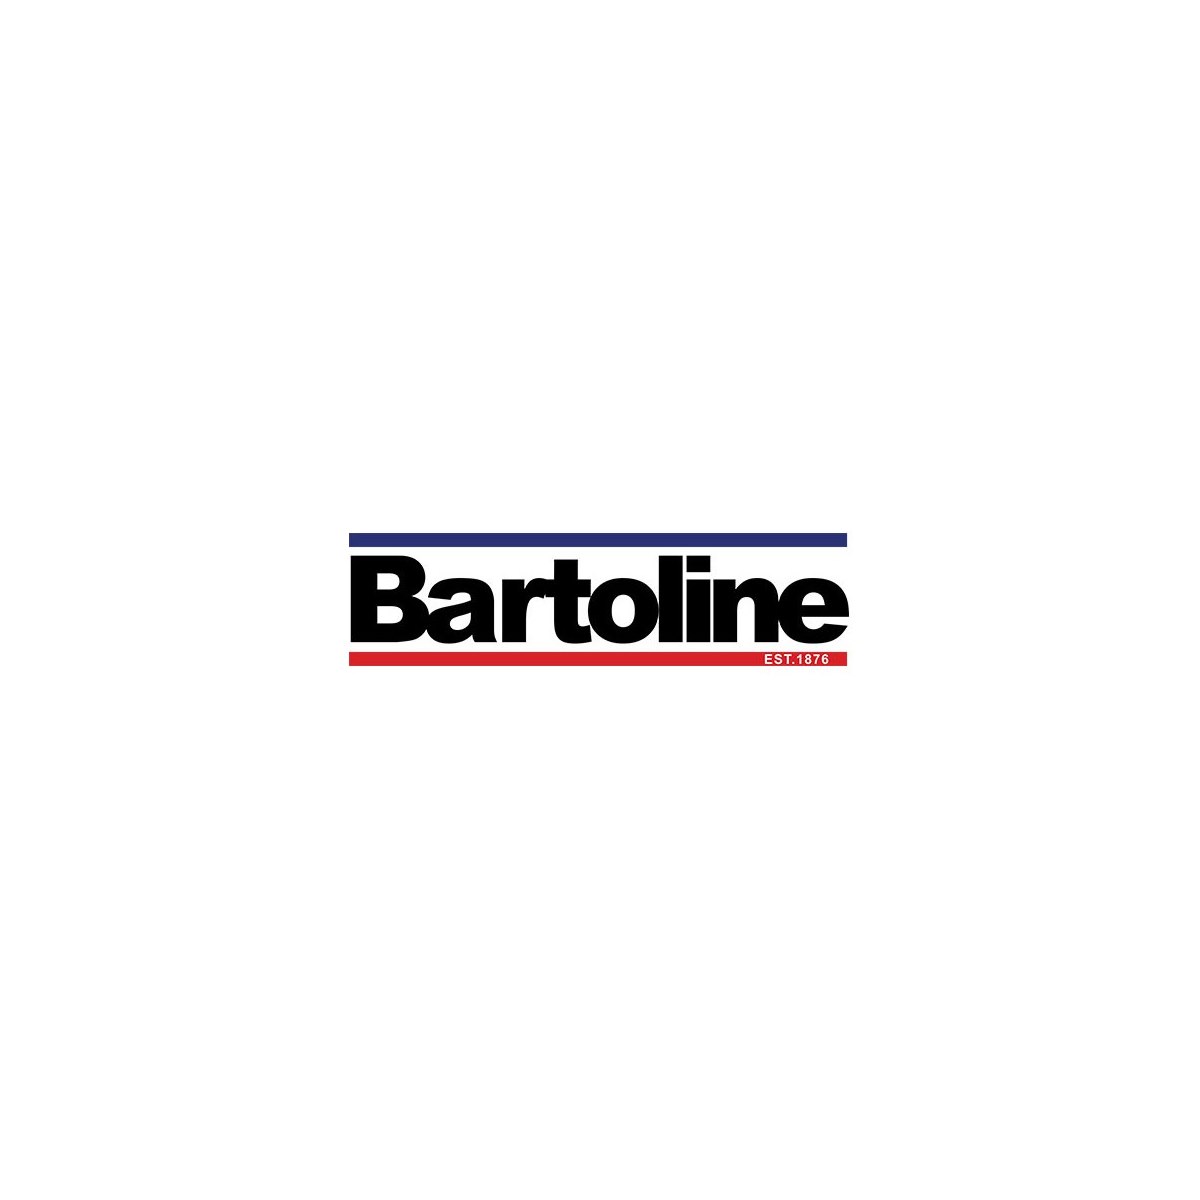 Where to Buy Bartoline Products